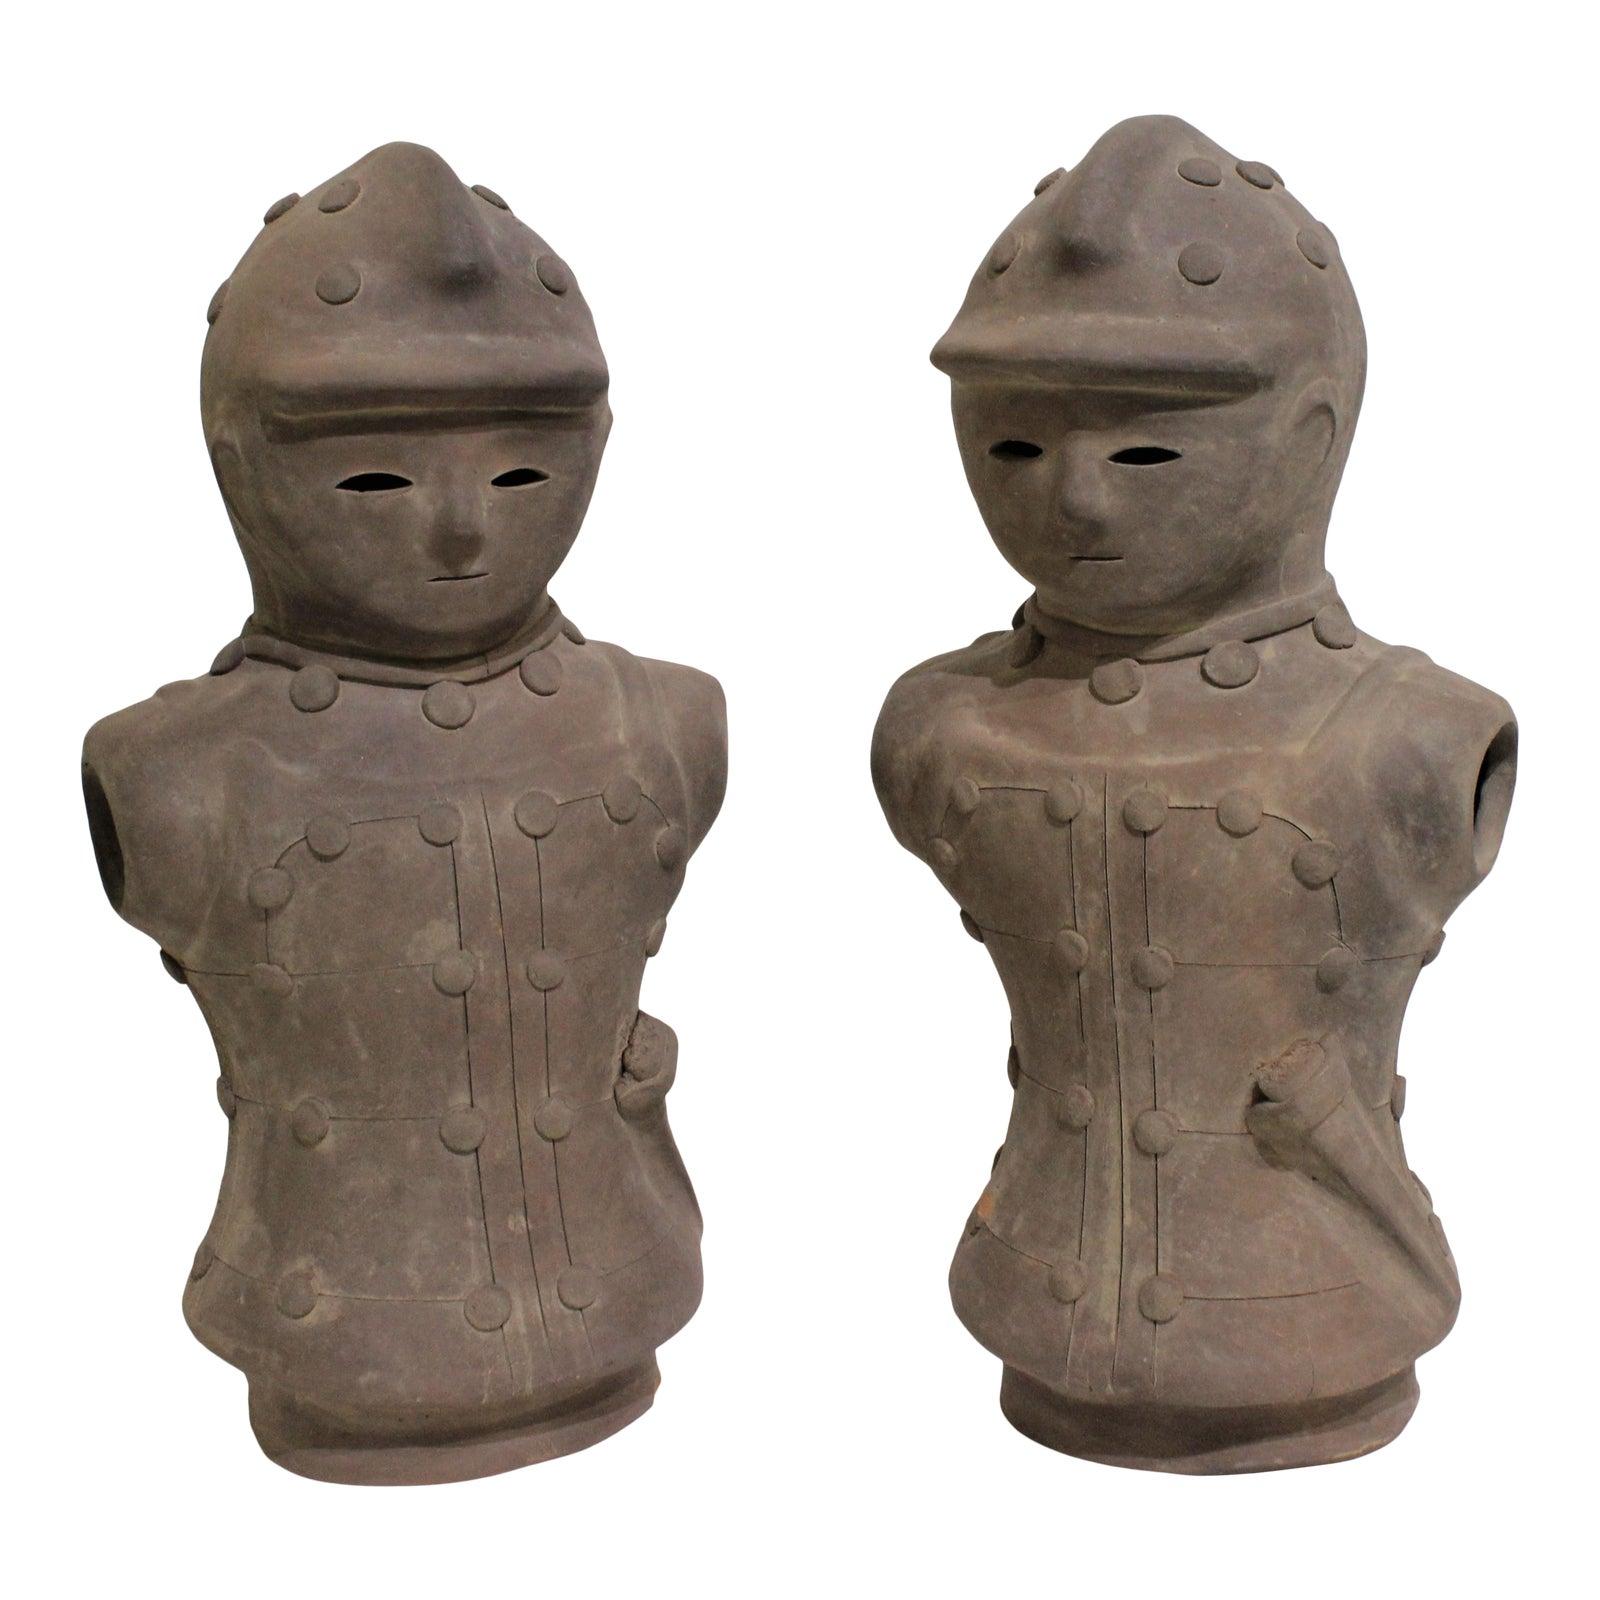 What does haniwa mean in Japanese?